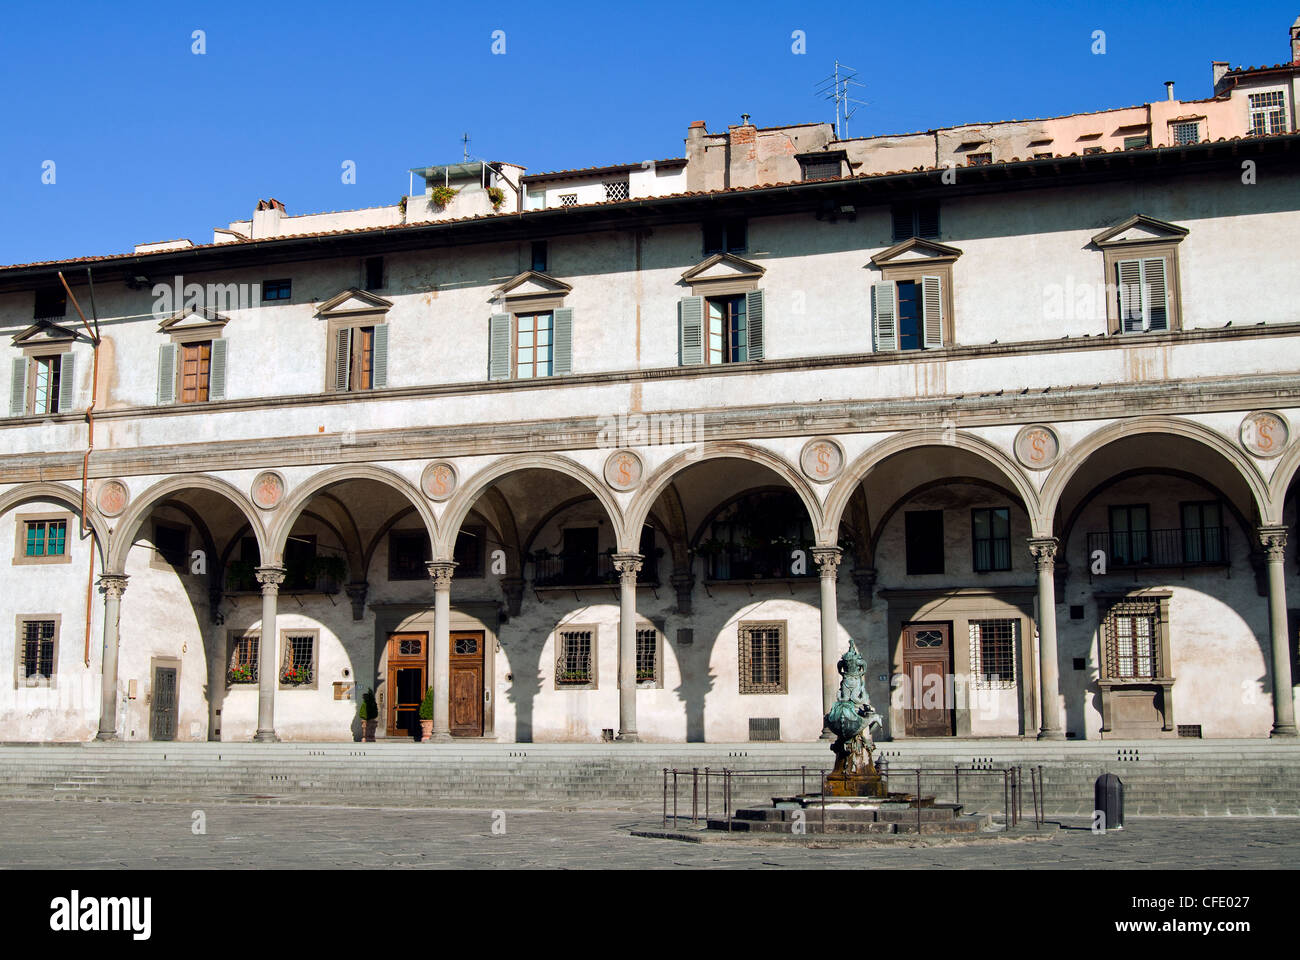 Piazza SS Annunziata, Porch Servants of Mary, Florence, UNESCO World Heritage Site, Tuscany, Italy, Europe Stock Photo